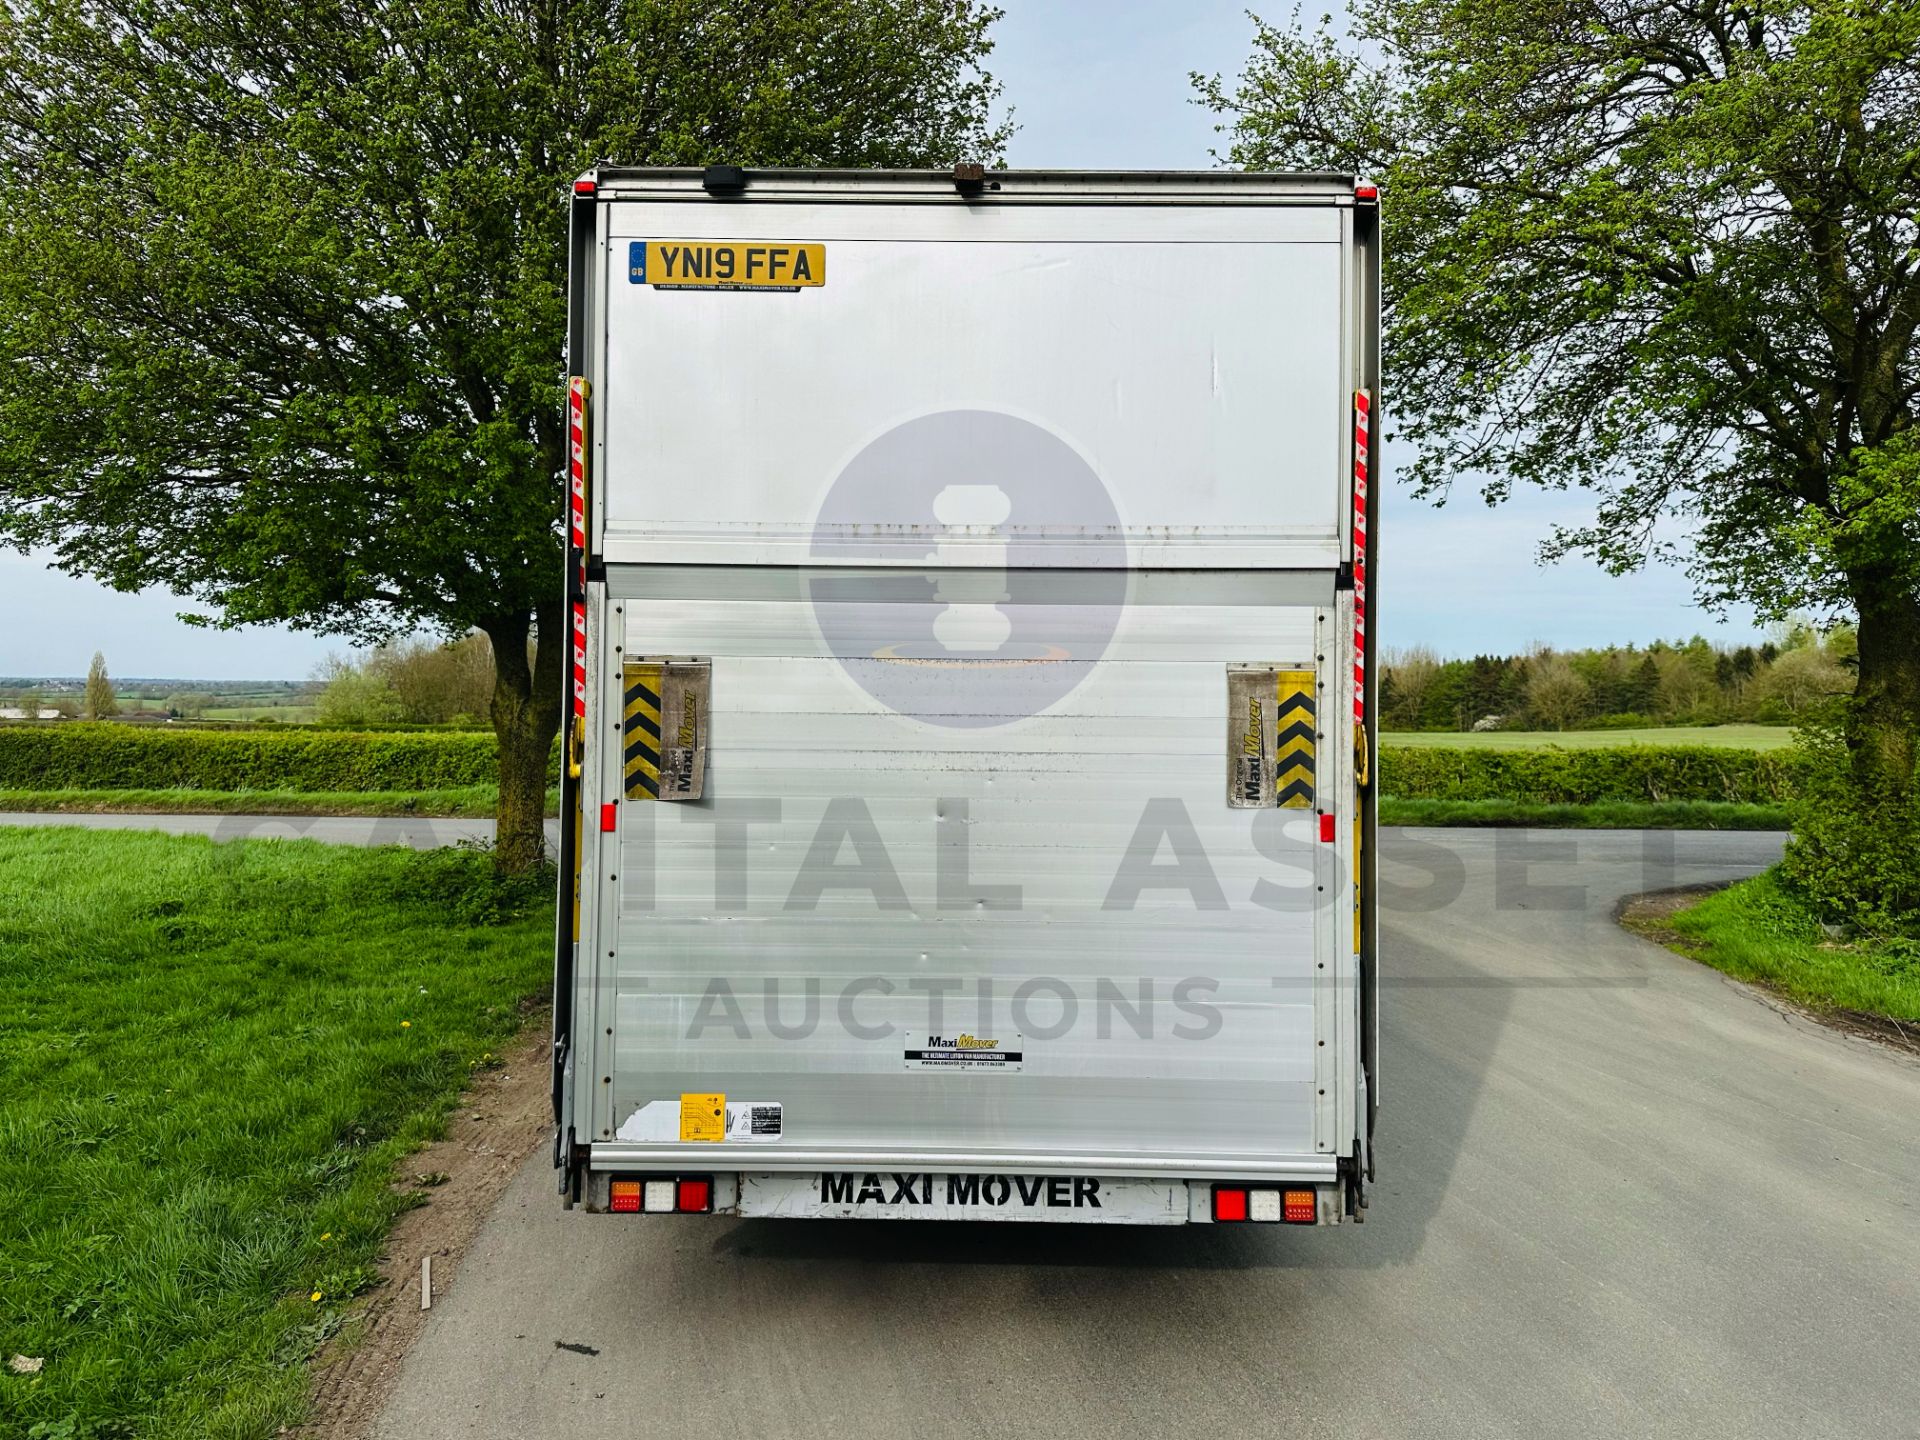 (ON SALE) PEUGEOT BOXER 335 *LWB LOW LOADER / MAXI MOVER LUTON* (2019 - EURO 6) 2.0 BLUE HDI *A/C* - Image 8 of 27